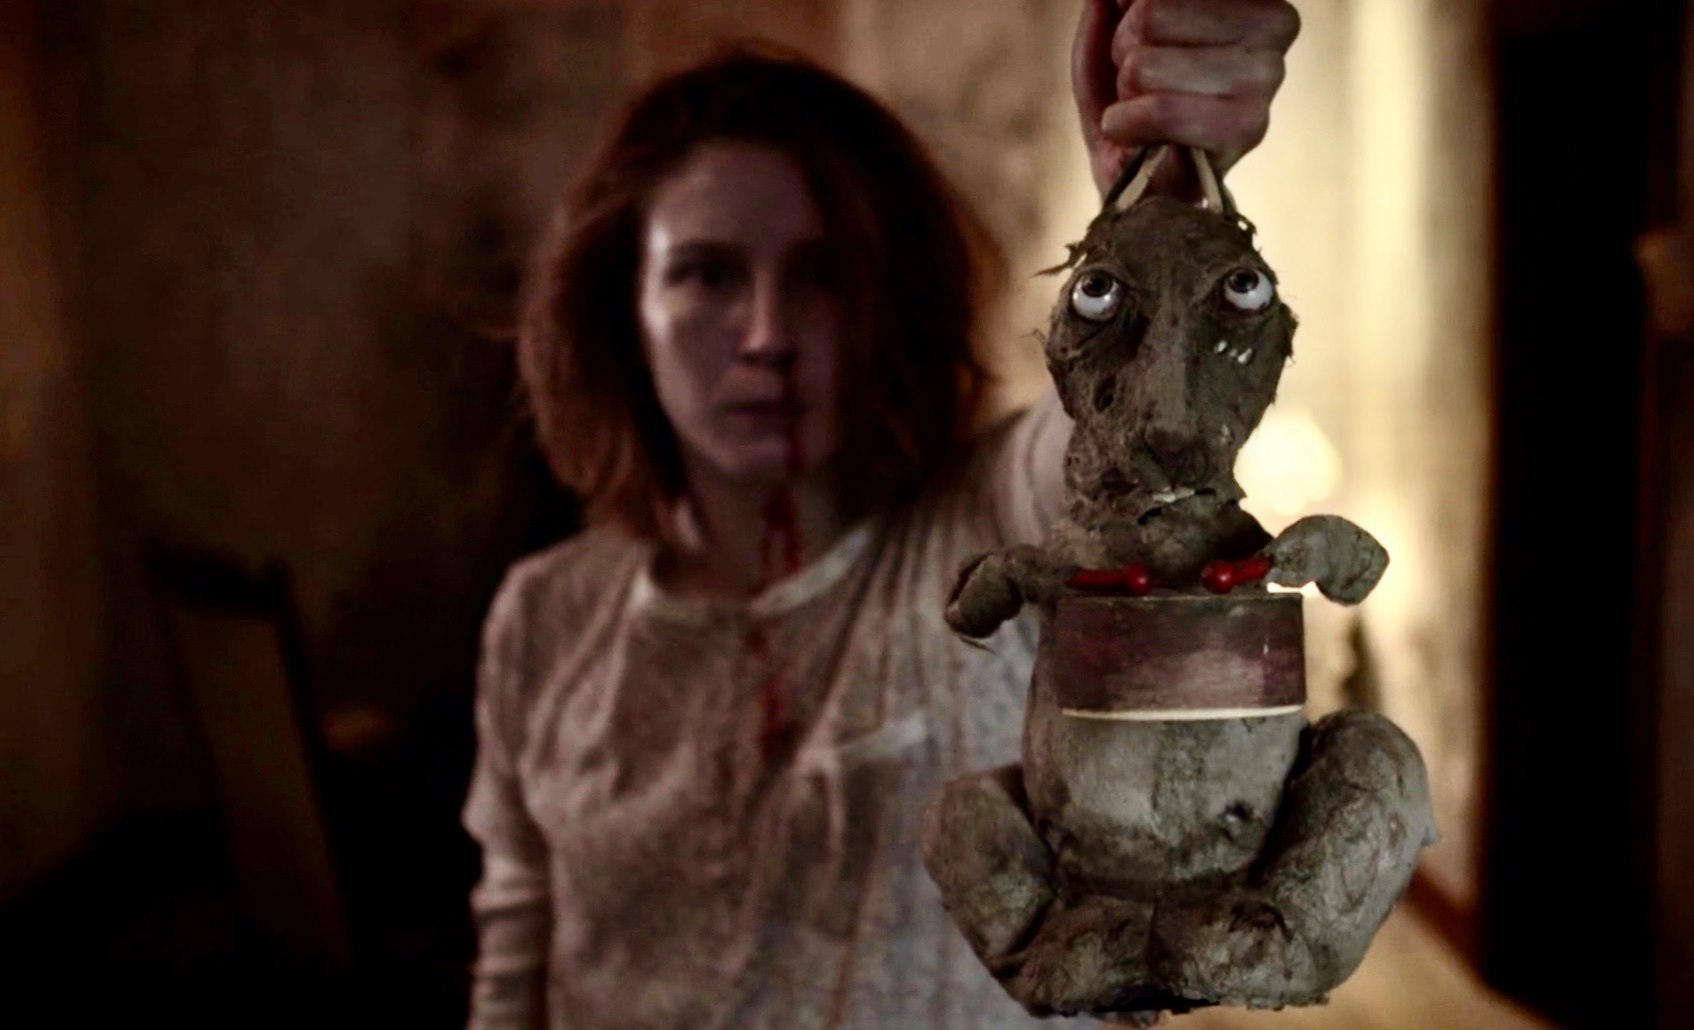 A woman with a bloody nose holds a stuffed bunny in a dark house in Caveat